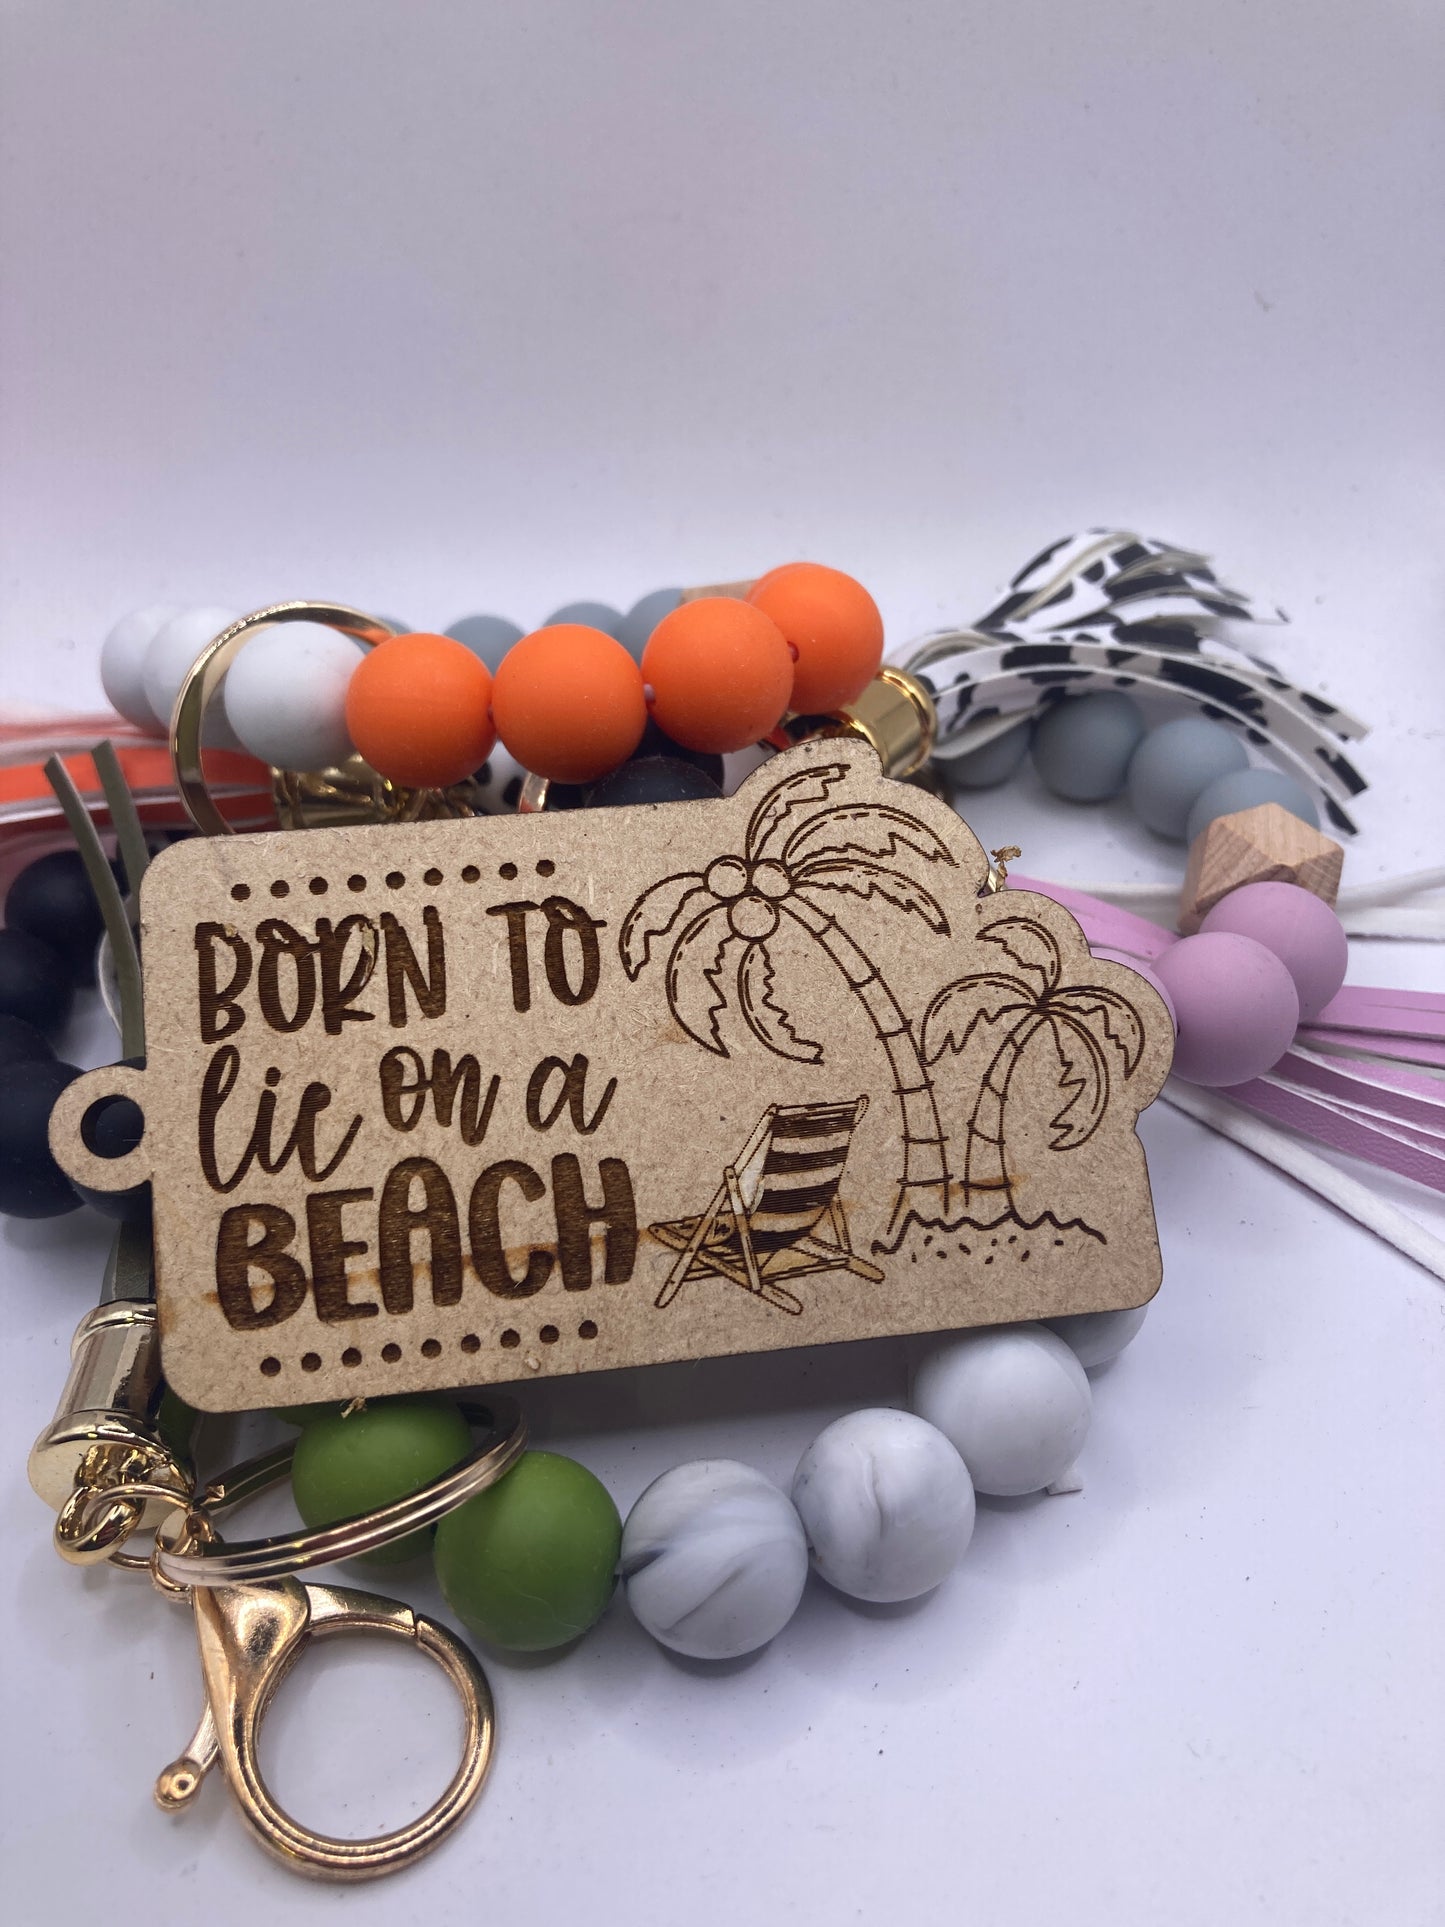 Born to Lie On a Beach Wooden Accessory Token